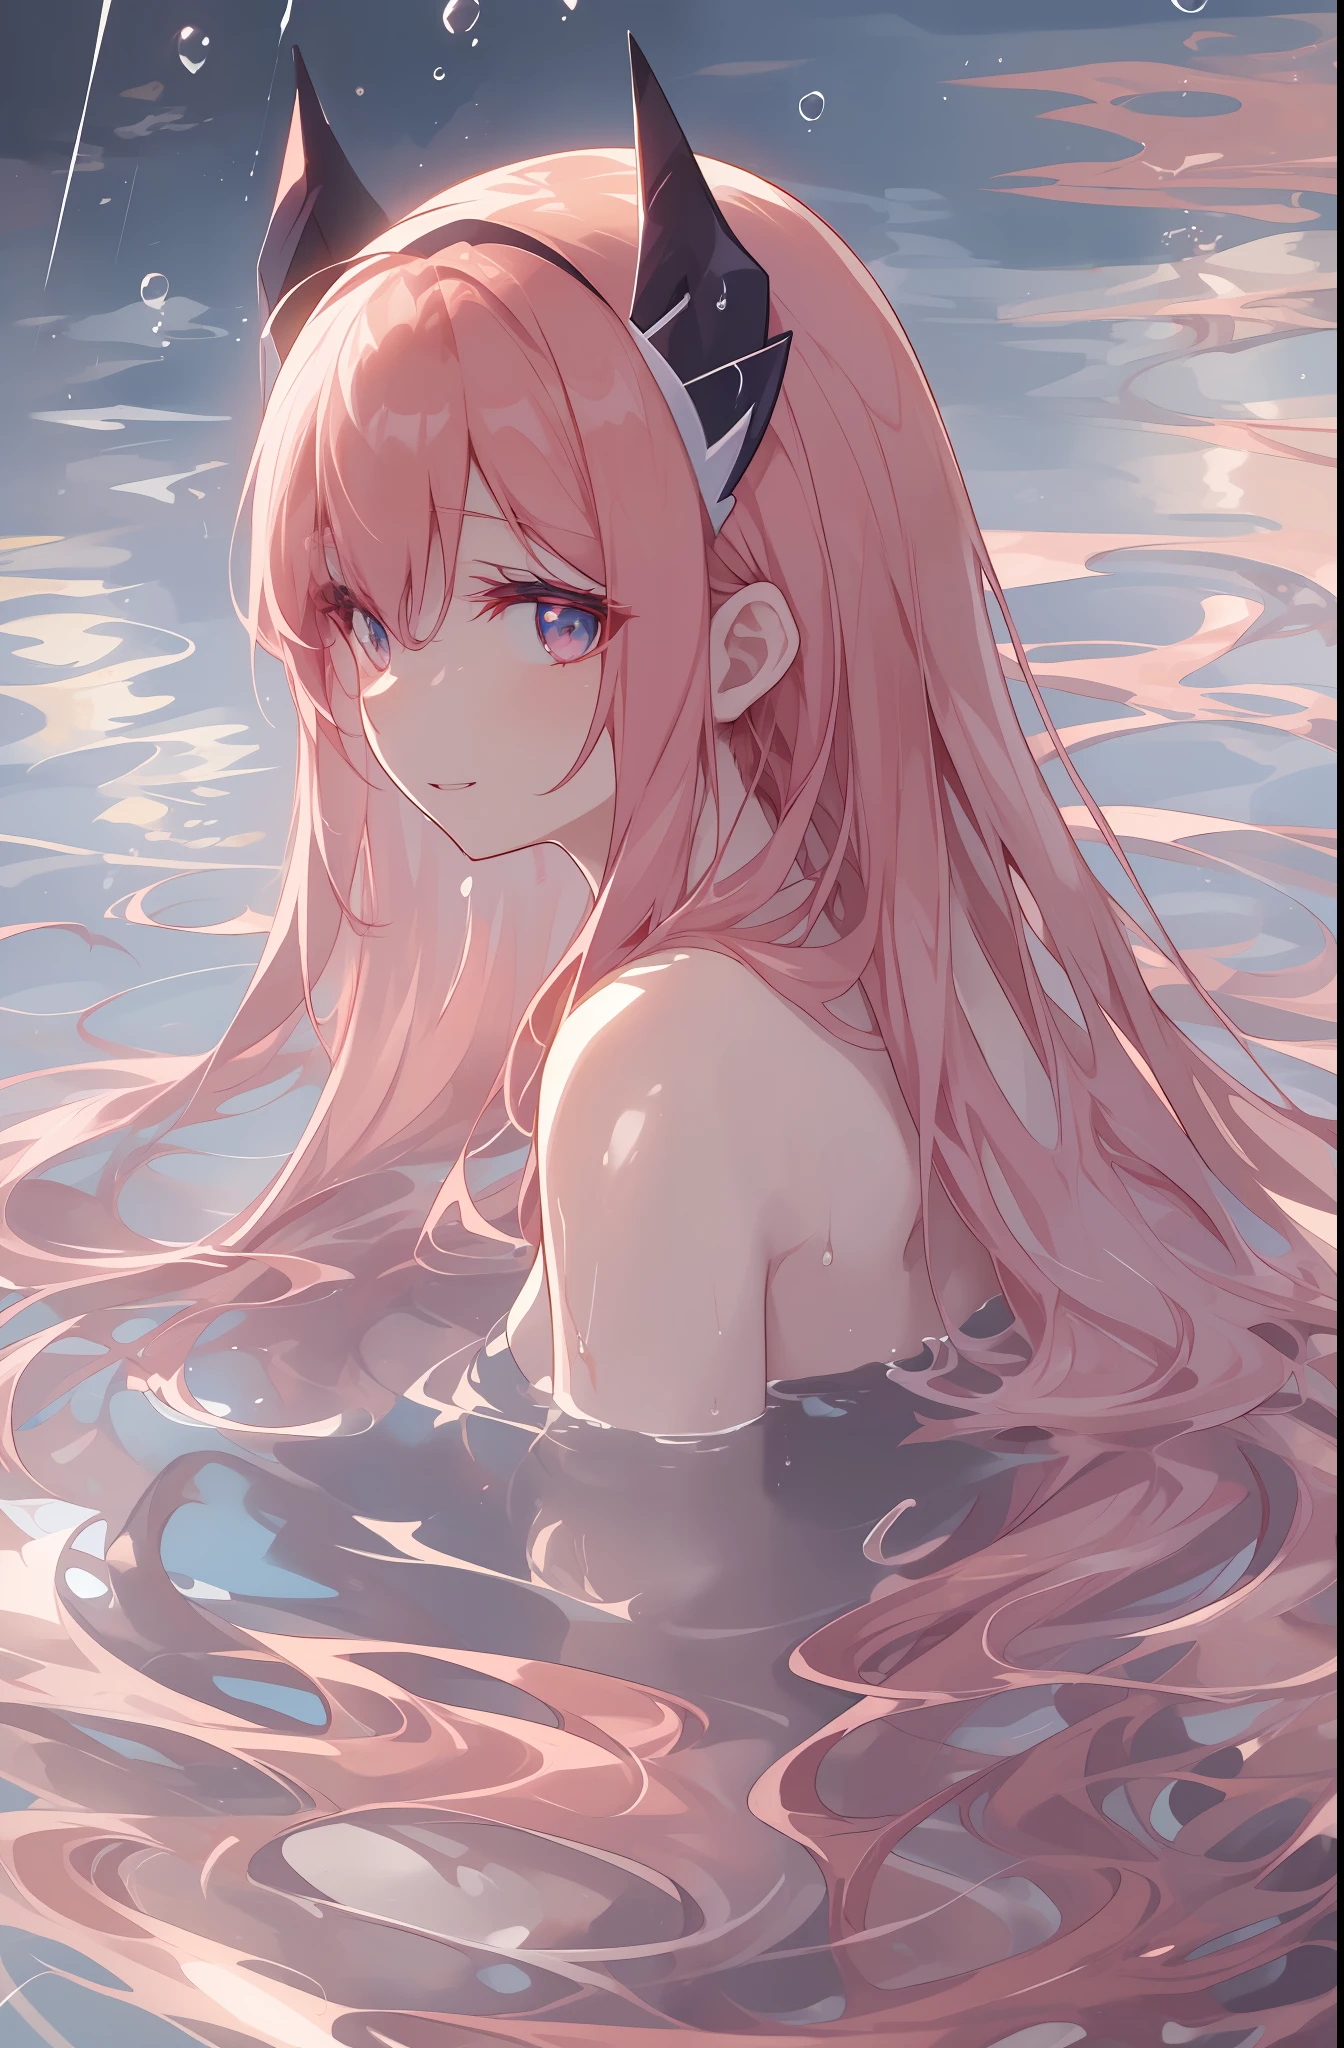 (2D Animation Style: 1.4), (Japanese Animation: 1.9), HD, (Golden Lighting: 1, 4), White Skin, Full Image Light, Horns, (Clear Eyes), White Sunlight, Hair Glow, (((Falling Rain: 1.2), Sunlight, Sun, Waves, (Water Surface), Close Up, Back, Back Turn, Glowing, Long Pink Hair, Clear Eyes, Prayer, Looking at the Girl from the Side, Side, Holy Light, (Clear Clothes), Underwater, laughter 😆😆😆😆, bubbles, (water divergence), (air divergence)